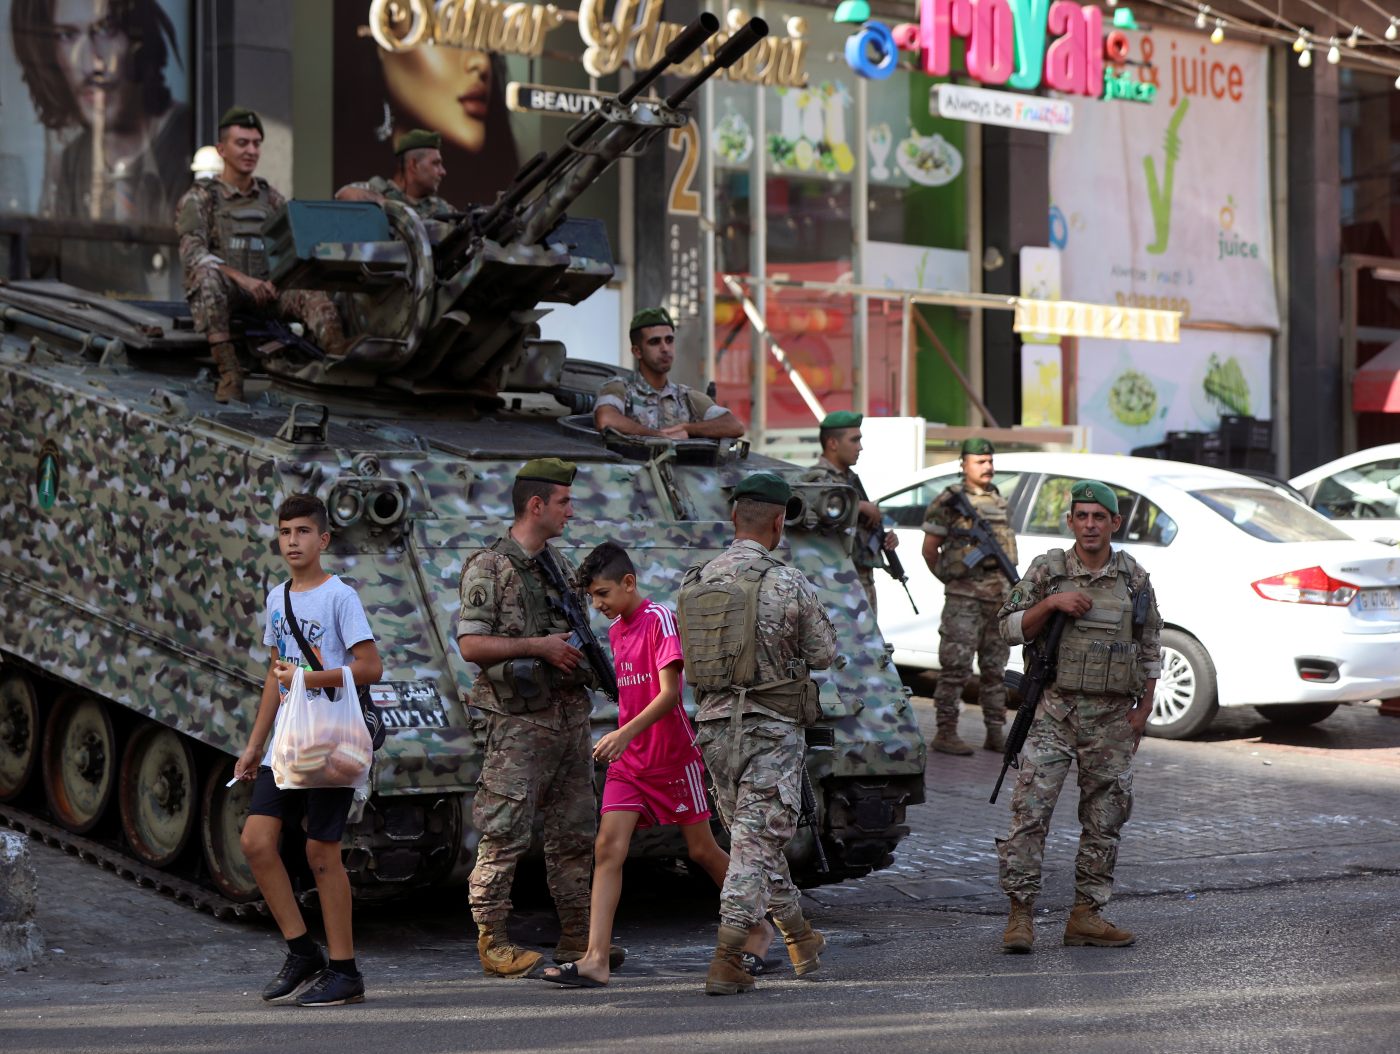 Boys walk past Lebanese army soldiers in Beirut, Lebanon on 15 October 2021, a day after gunfire erupted (Reuters)